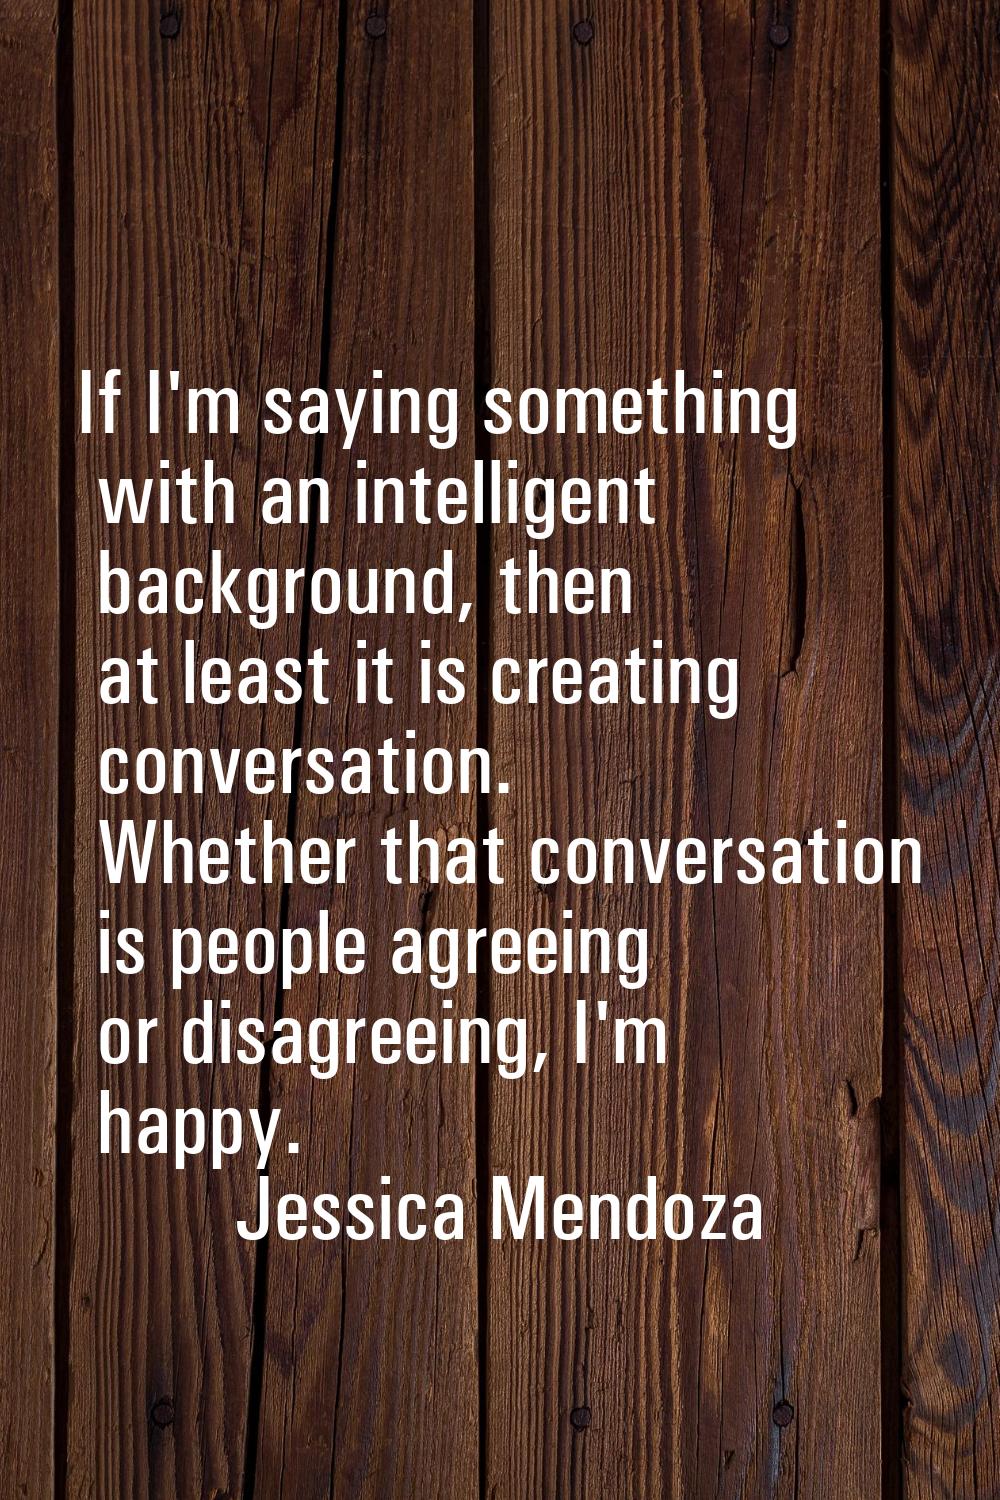 If I'm saying something with an intelligent background, then at least it is creating conversation. 